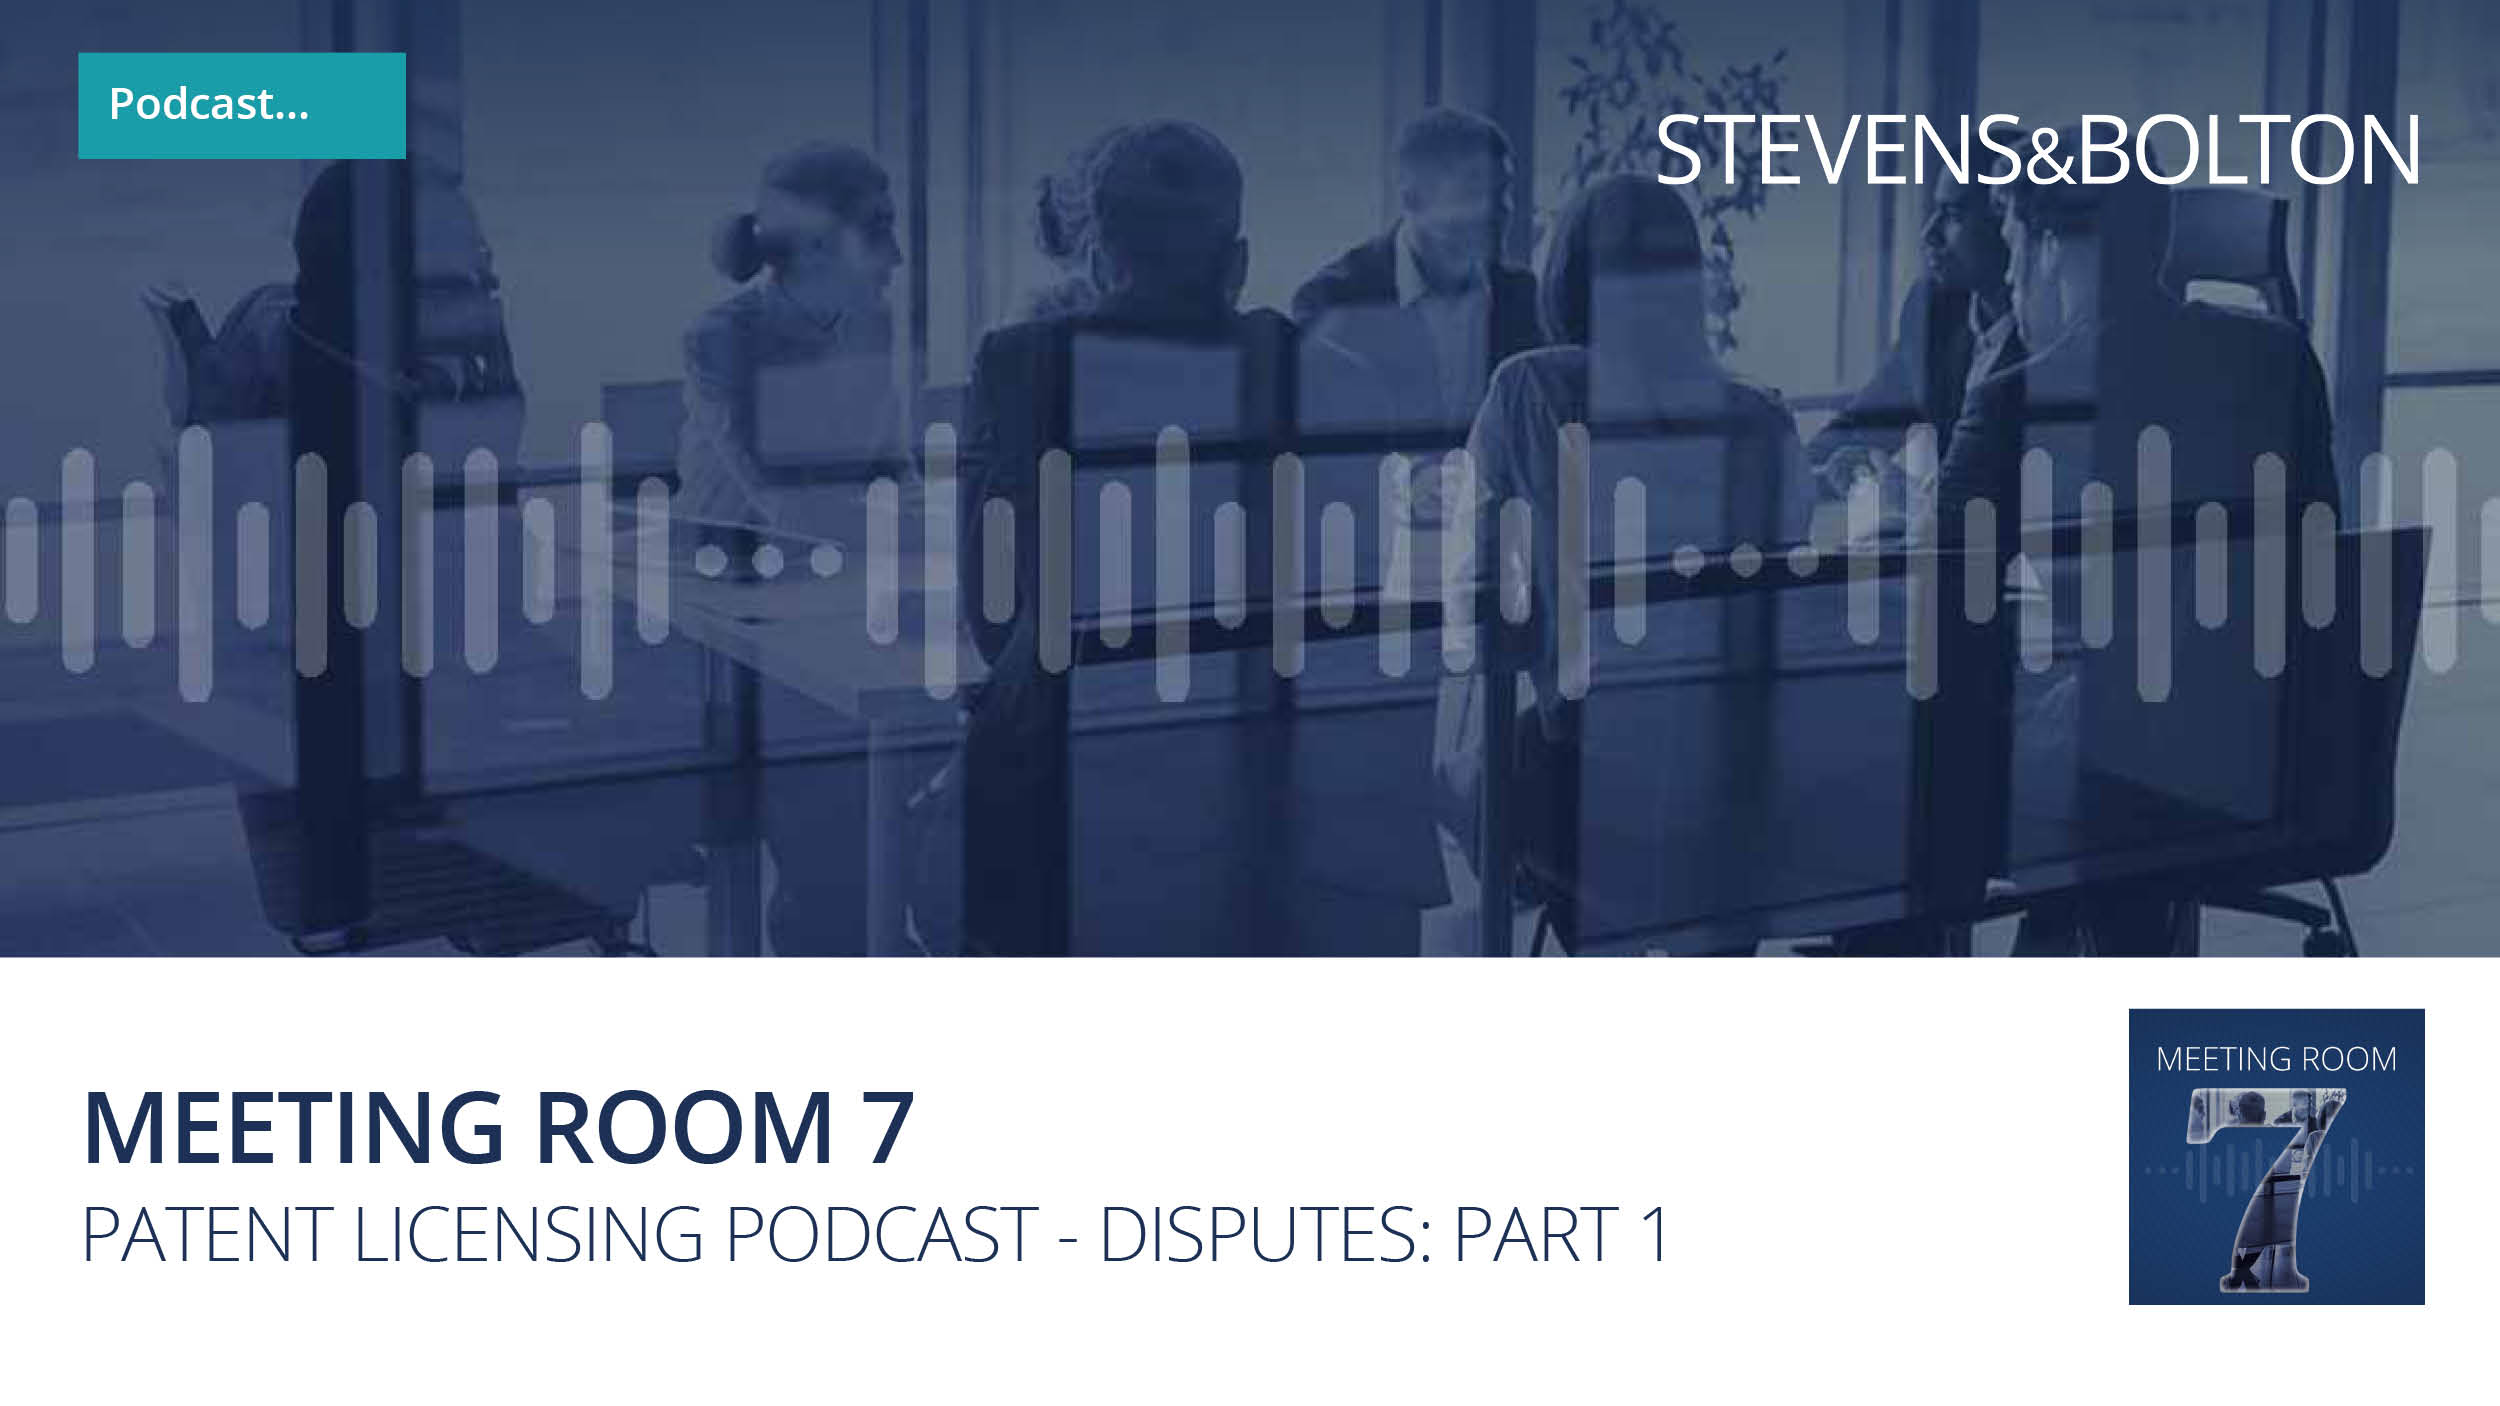 Meeting Room 7 - The patent licensing podcast - Disputes: part 1